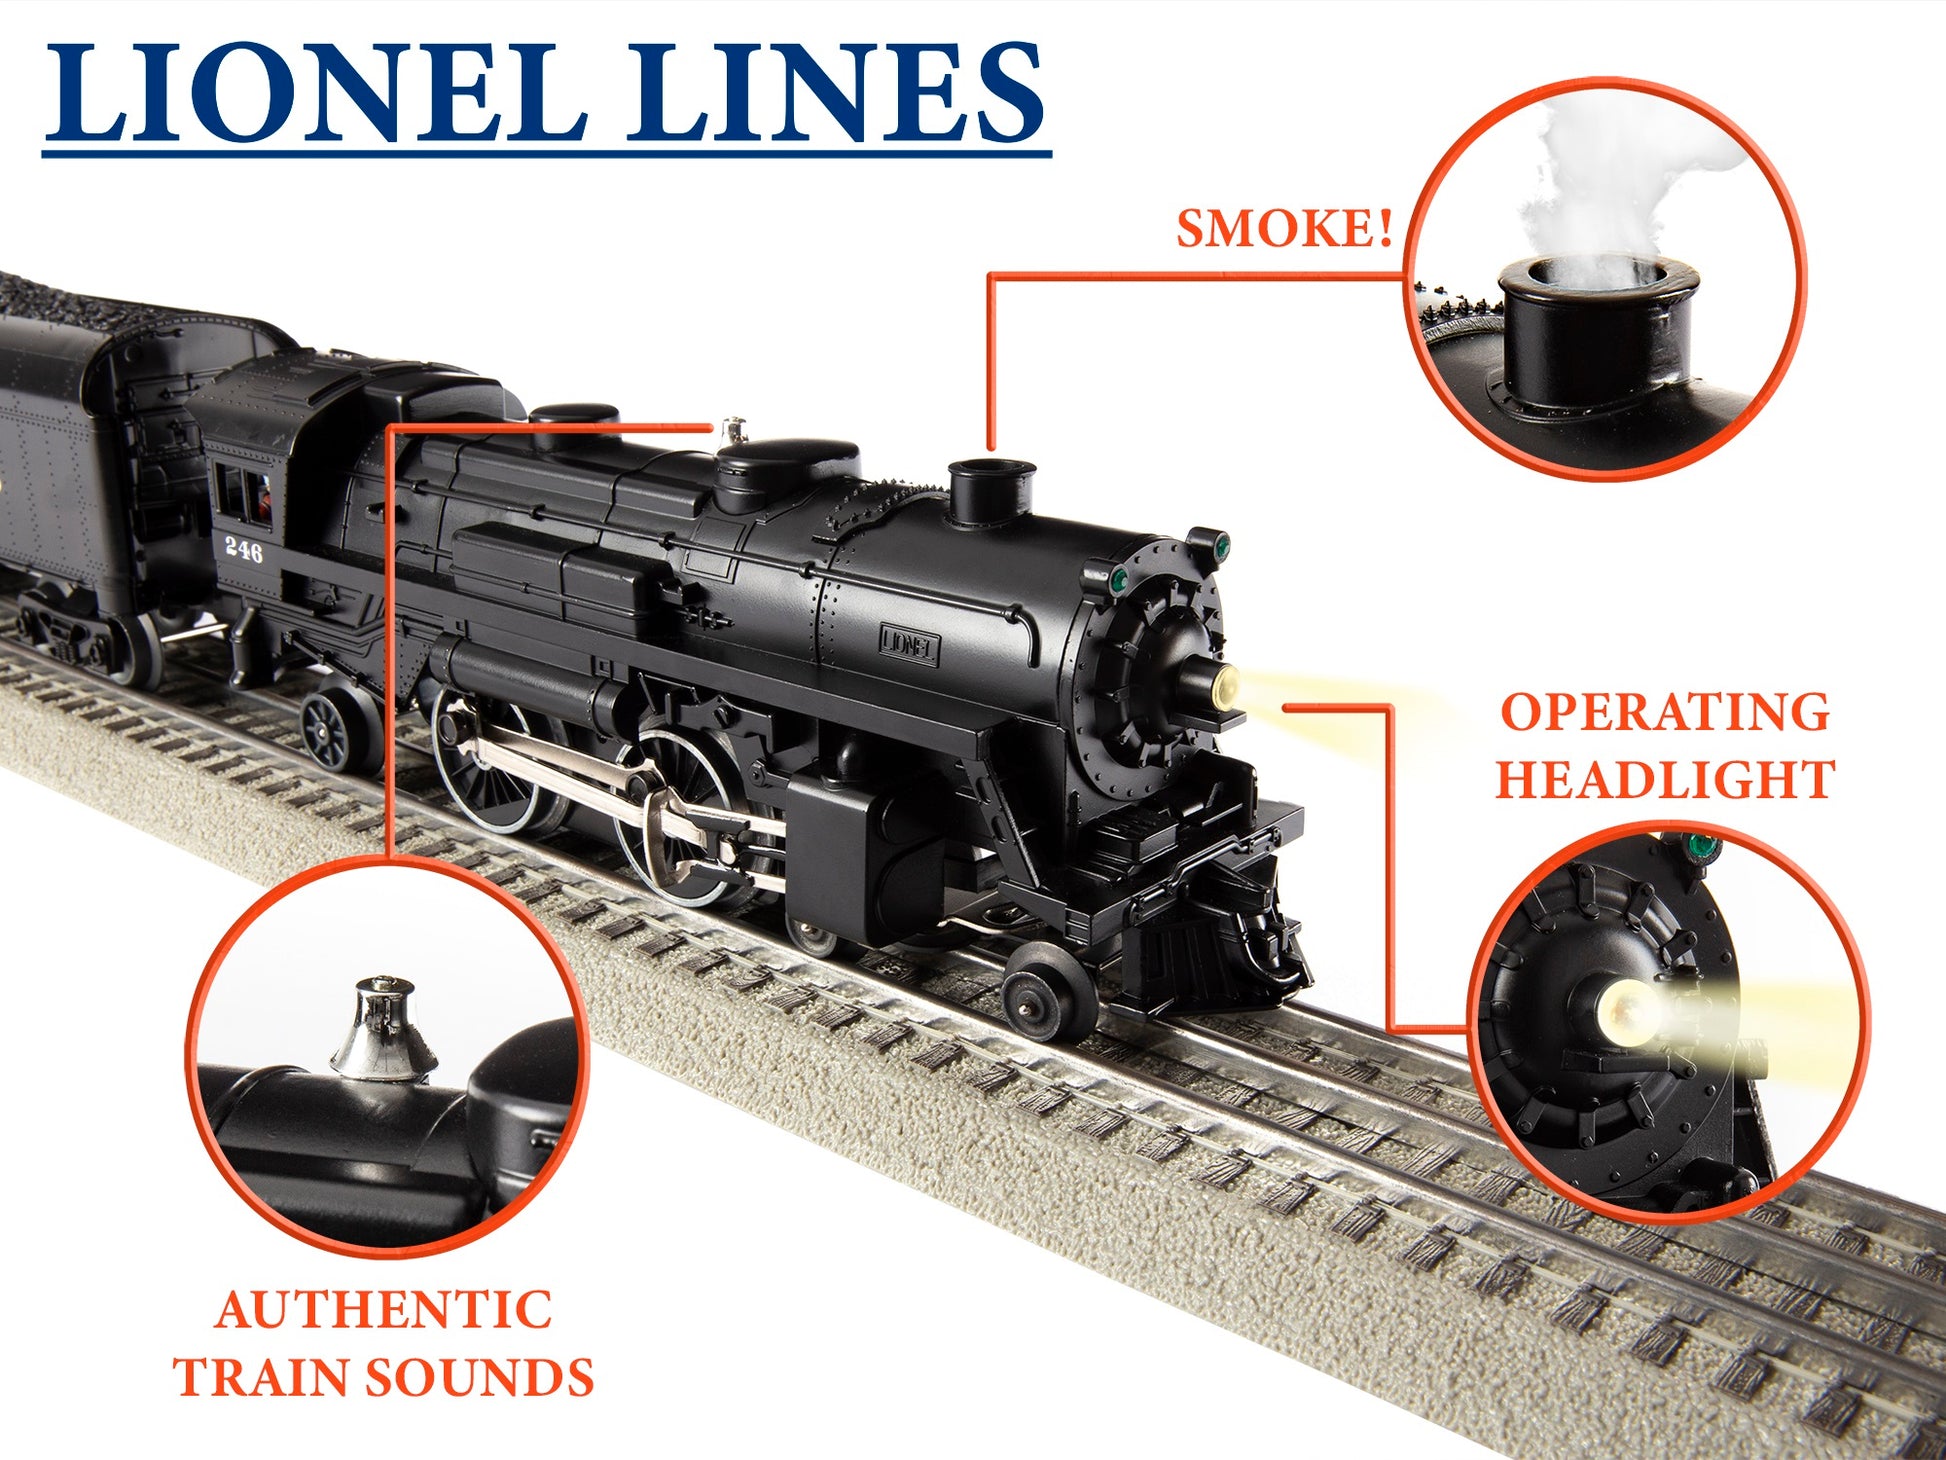 Locomotive of Model Train Set O Scale Lionel Lines Mixed Freight LionChief Bluetooth 5.0.